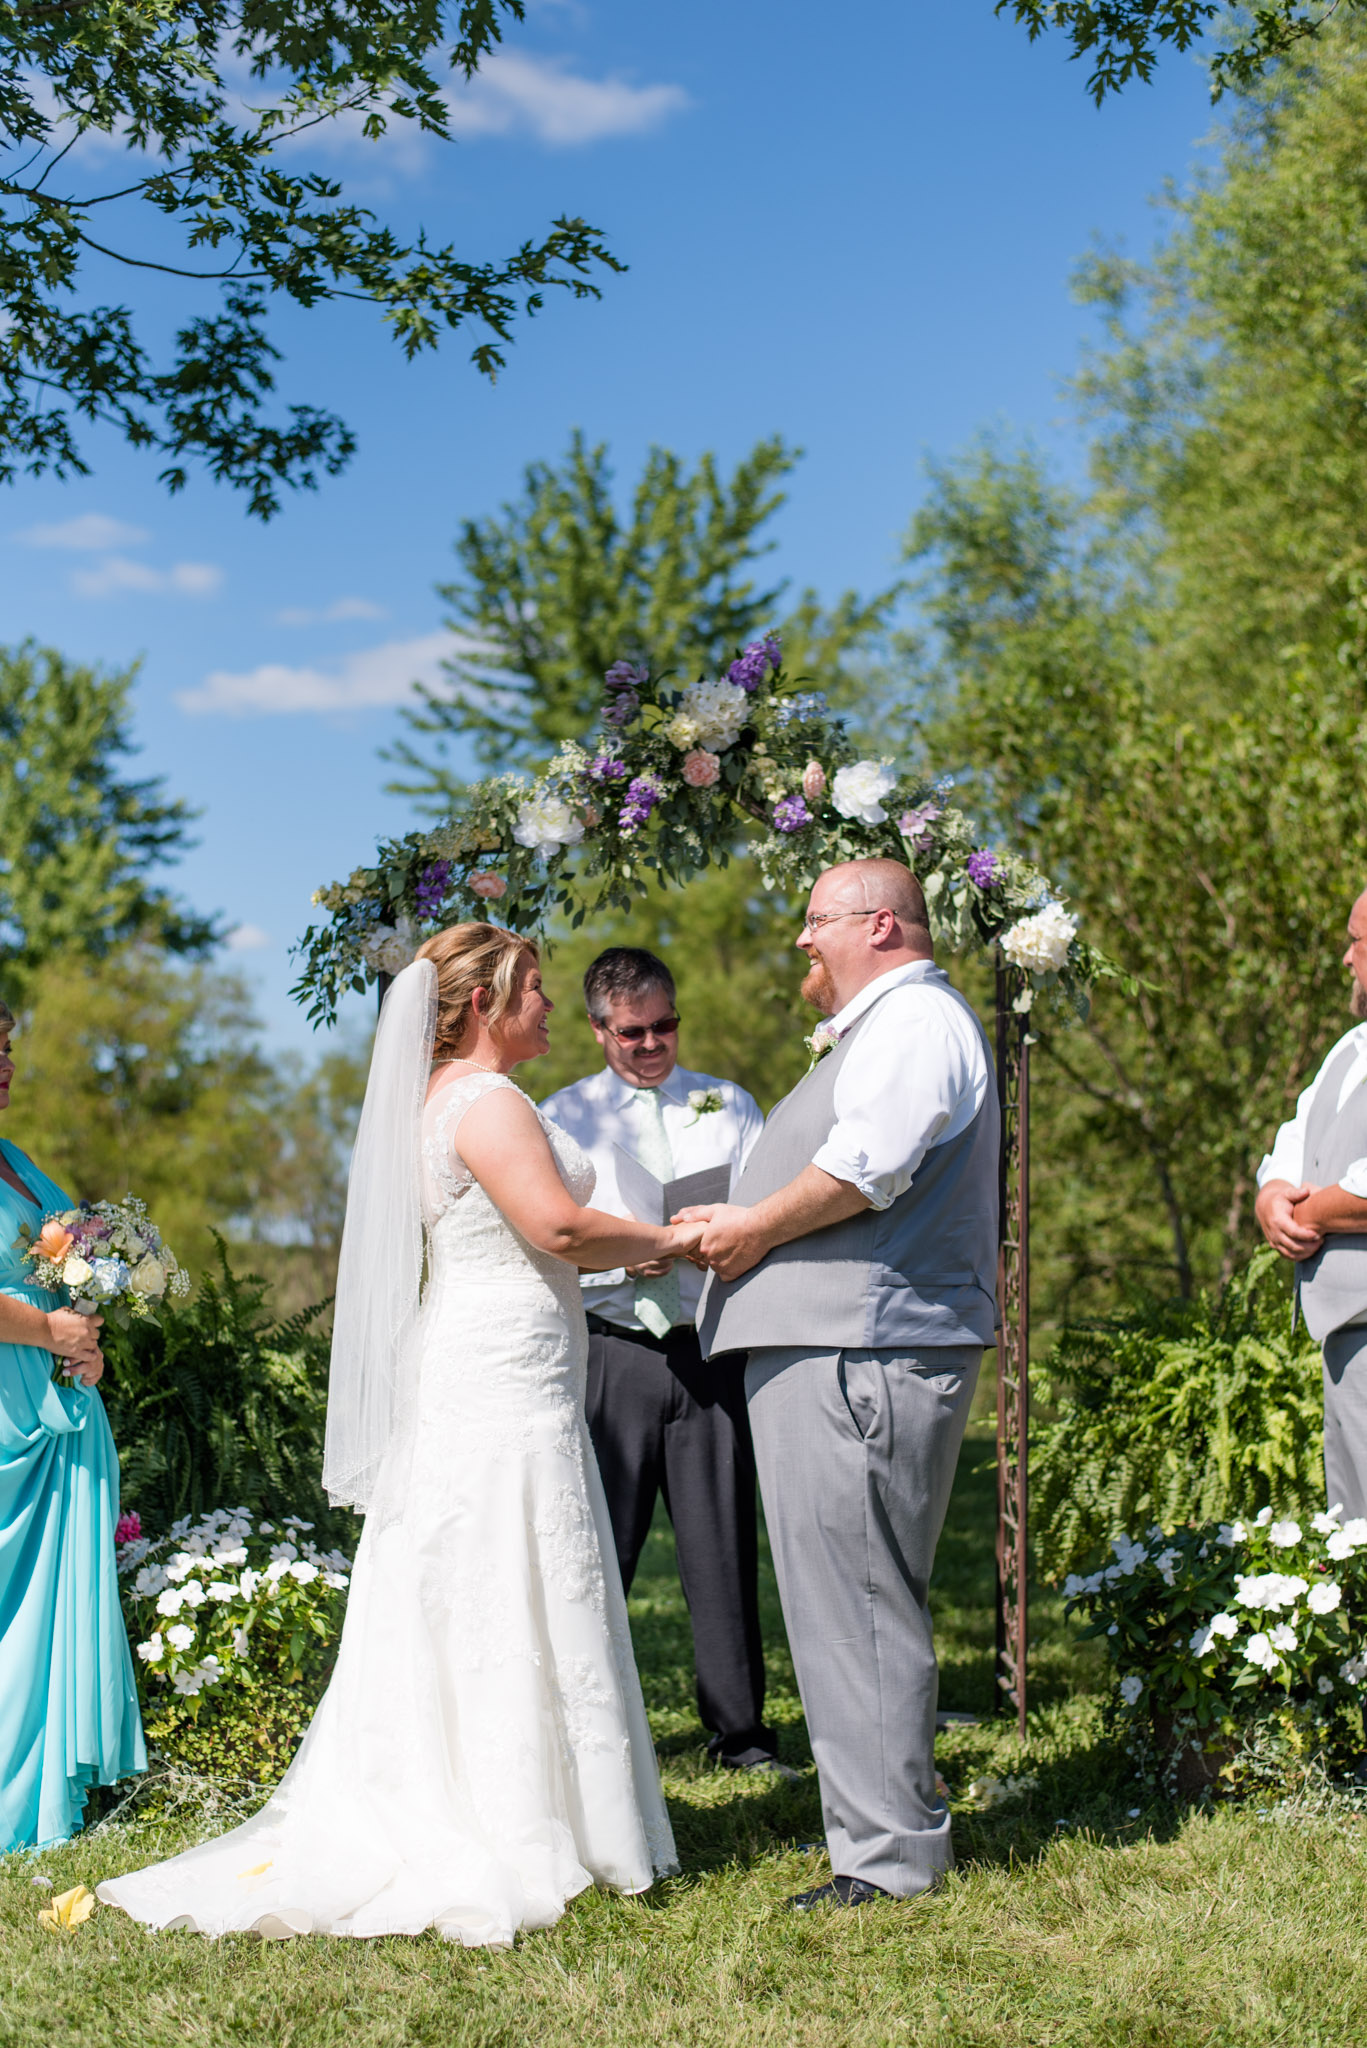 Bride and Groom Smile at Each Other During Wedding Ceremony